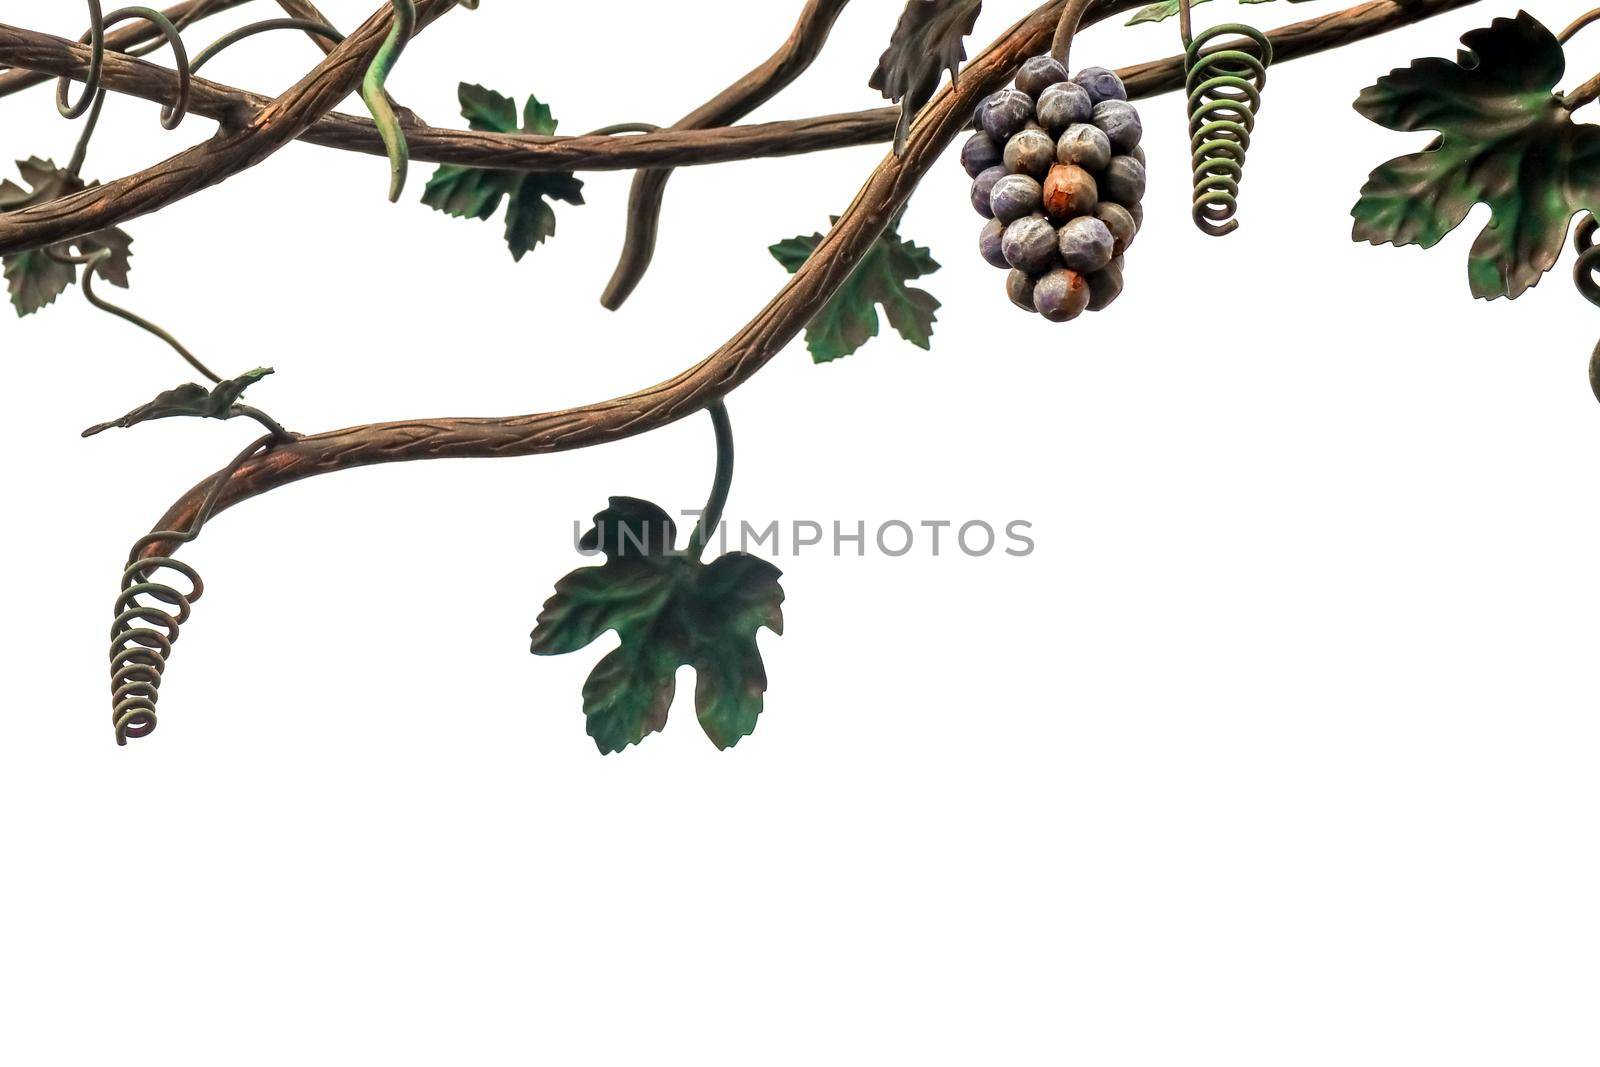 metal vine on a white background isolate  by roman112007